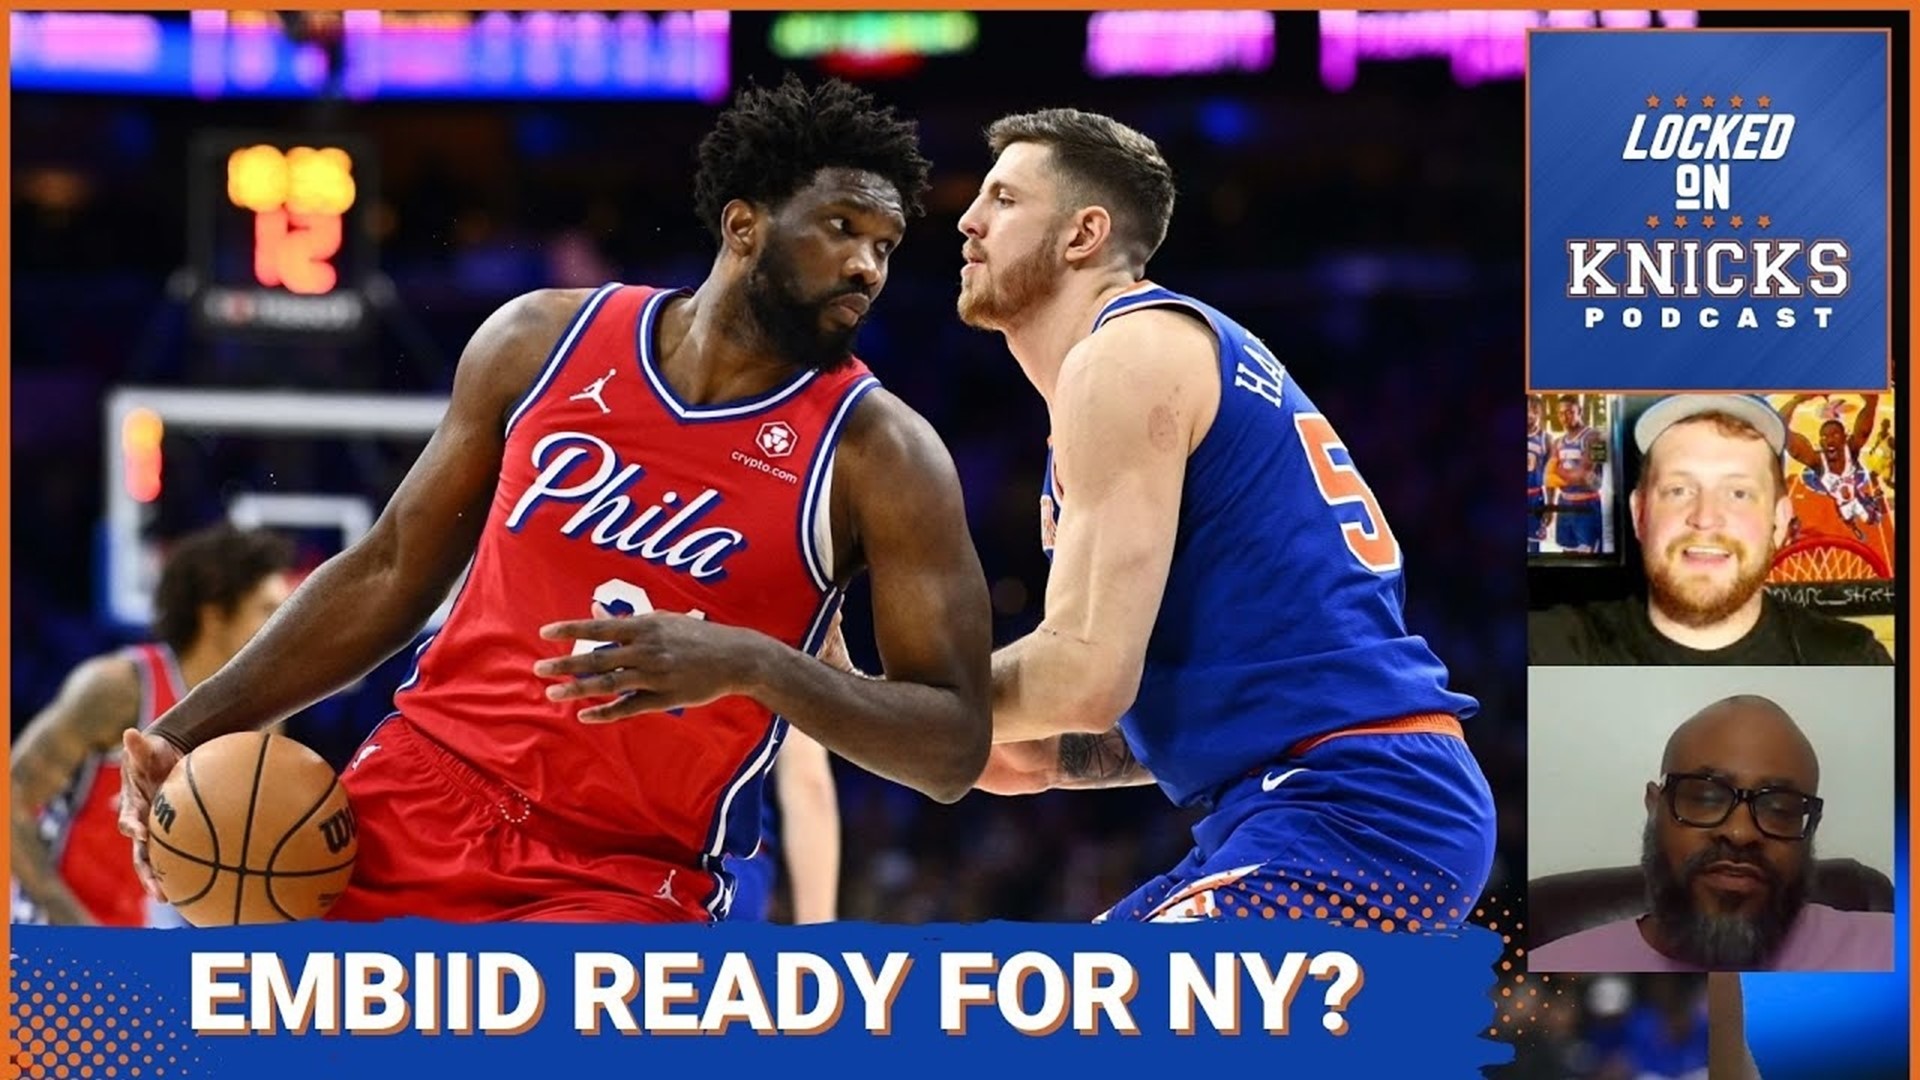 It's playoff time! Alex is joined by Locked On Sixers' Keith Pompey to get into Knicks-Sixers, including if Joel Embiid is ready to go vs. the Knicks.